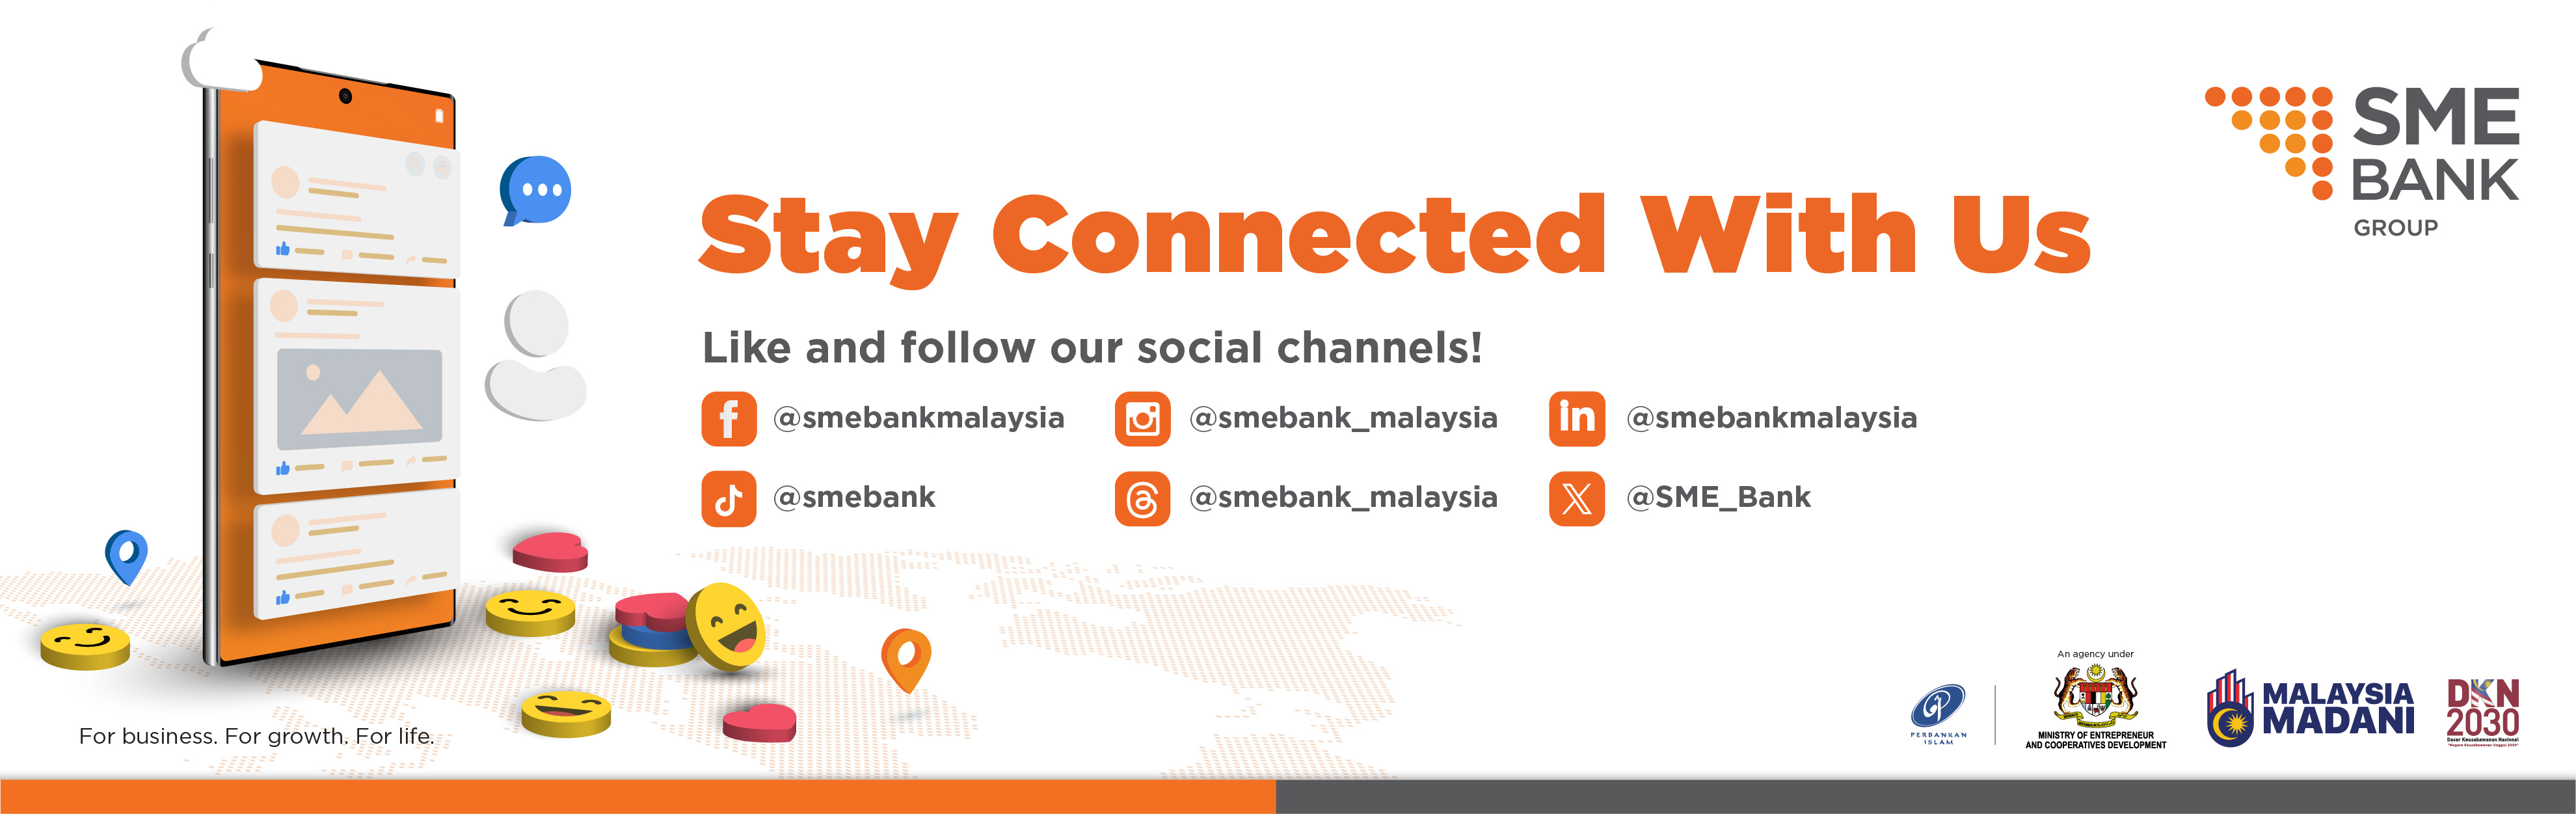 SME Bank: Stay Connected With Us